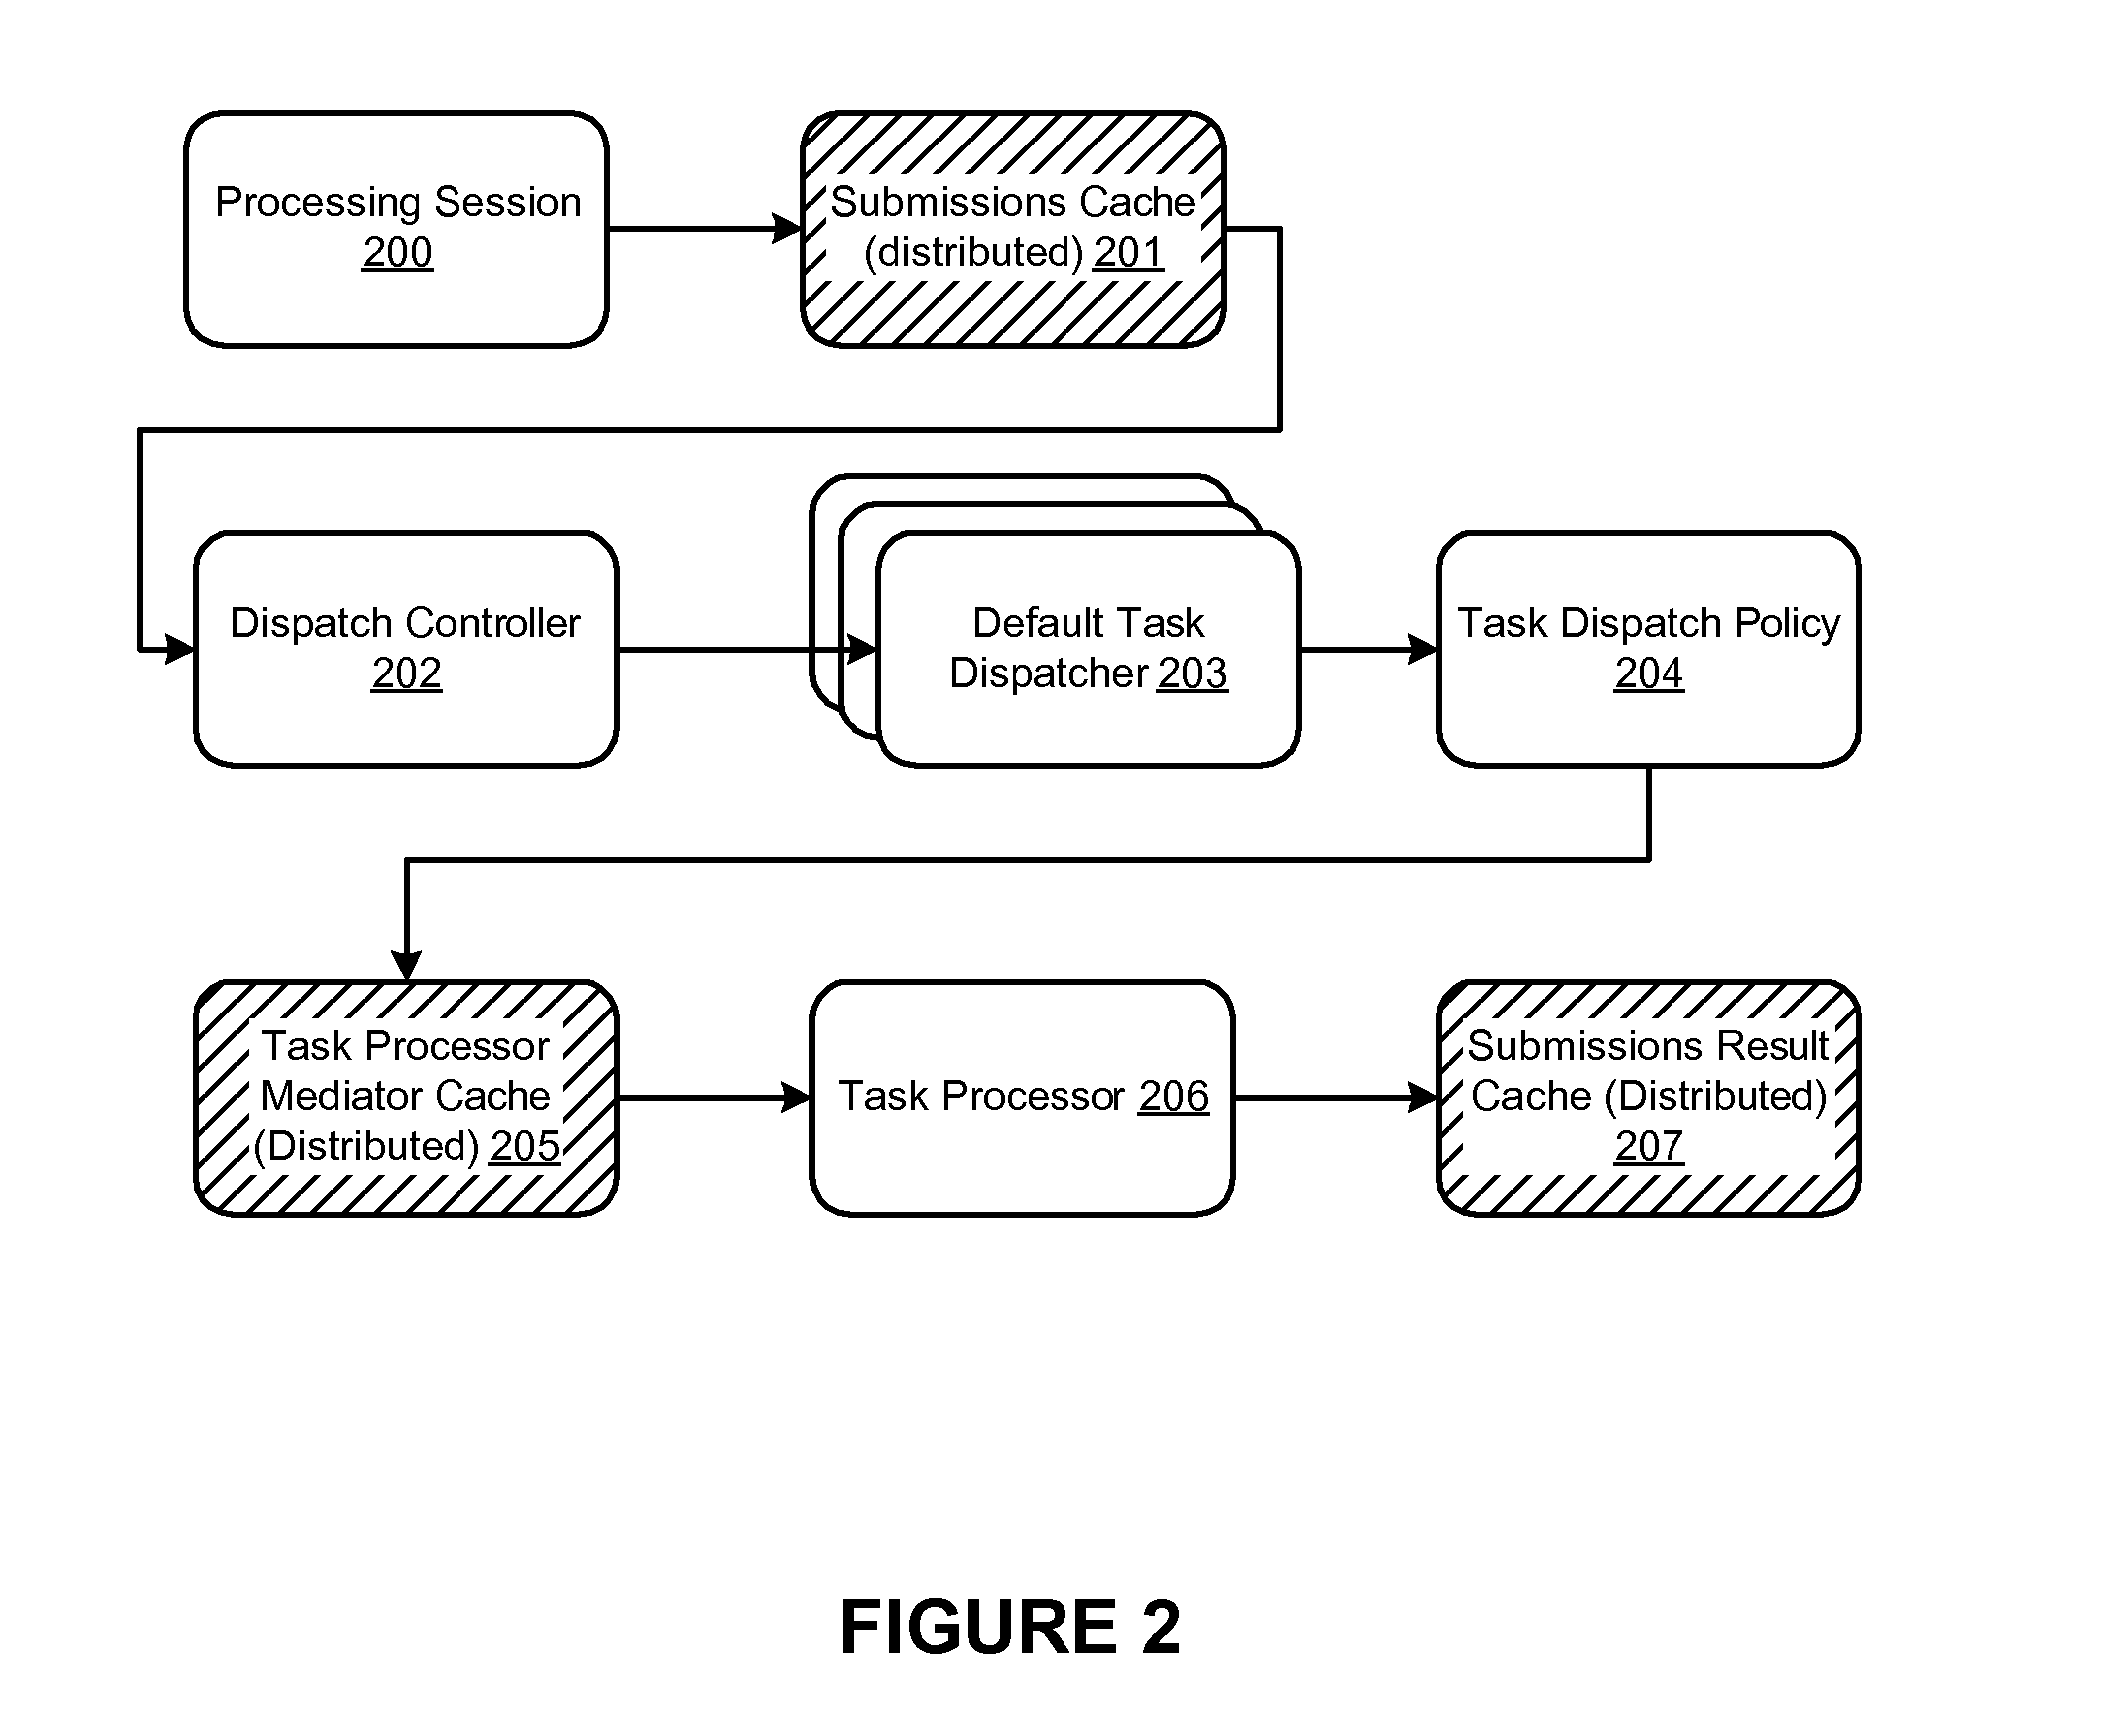 Processing pattern framework for dispatching and executing tasks in a distributed computing grid